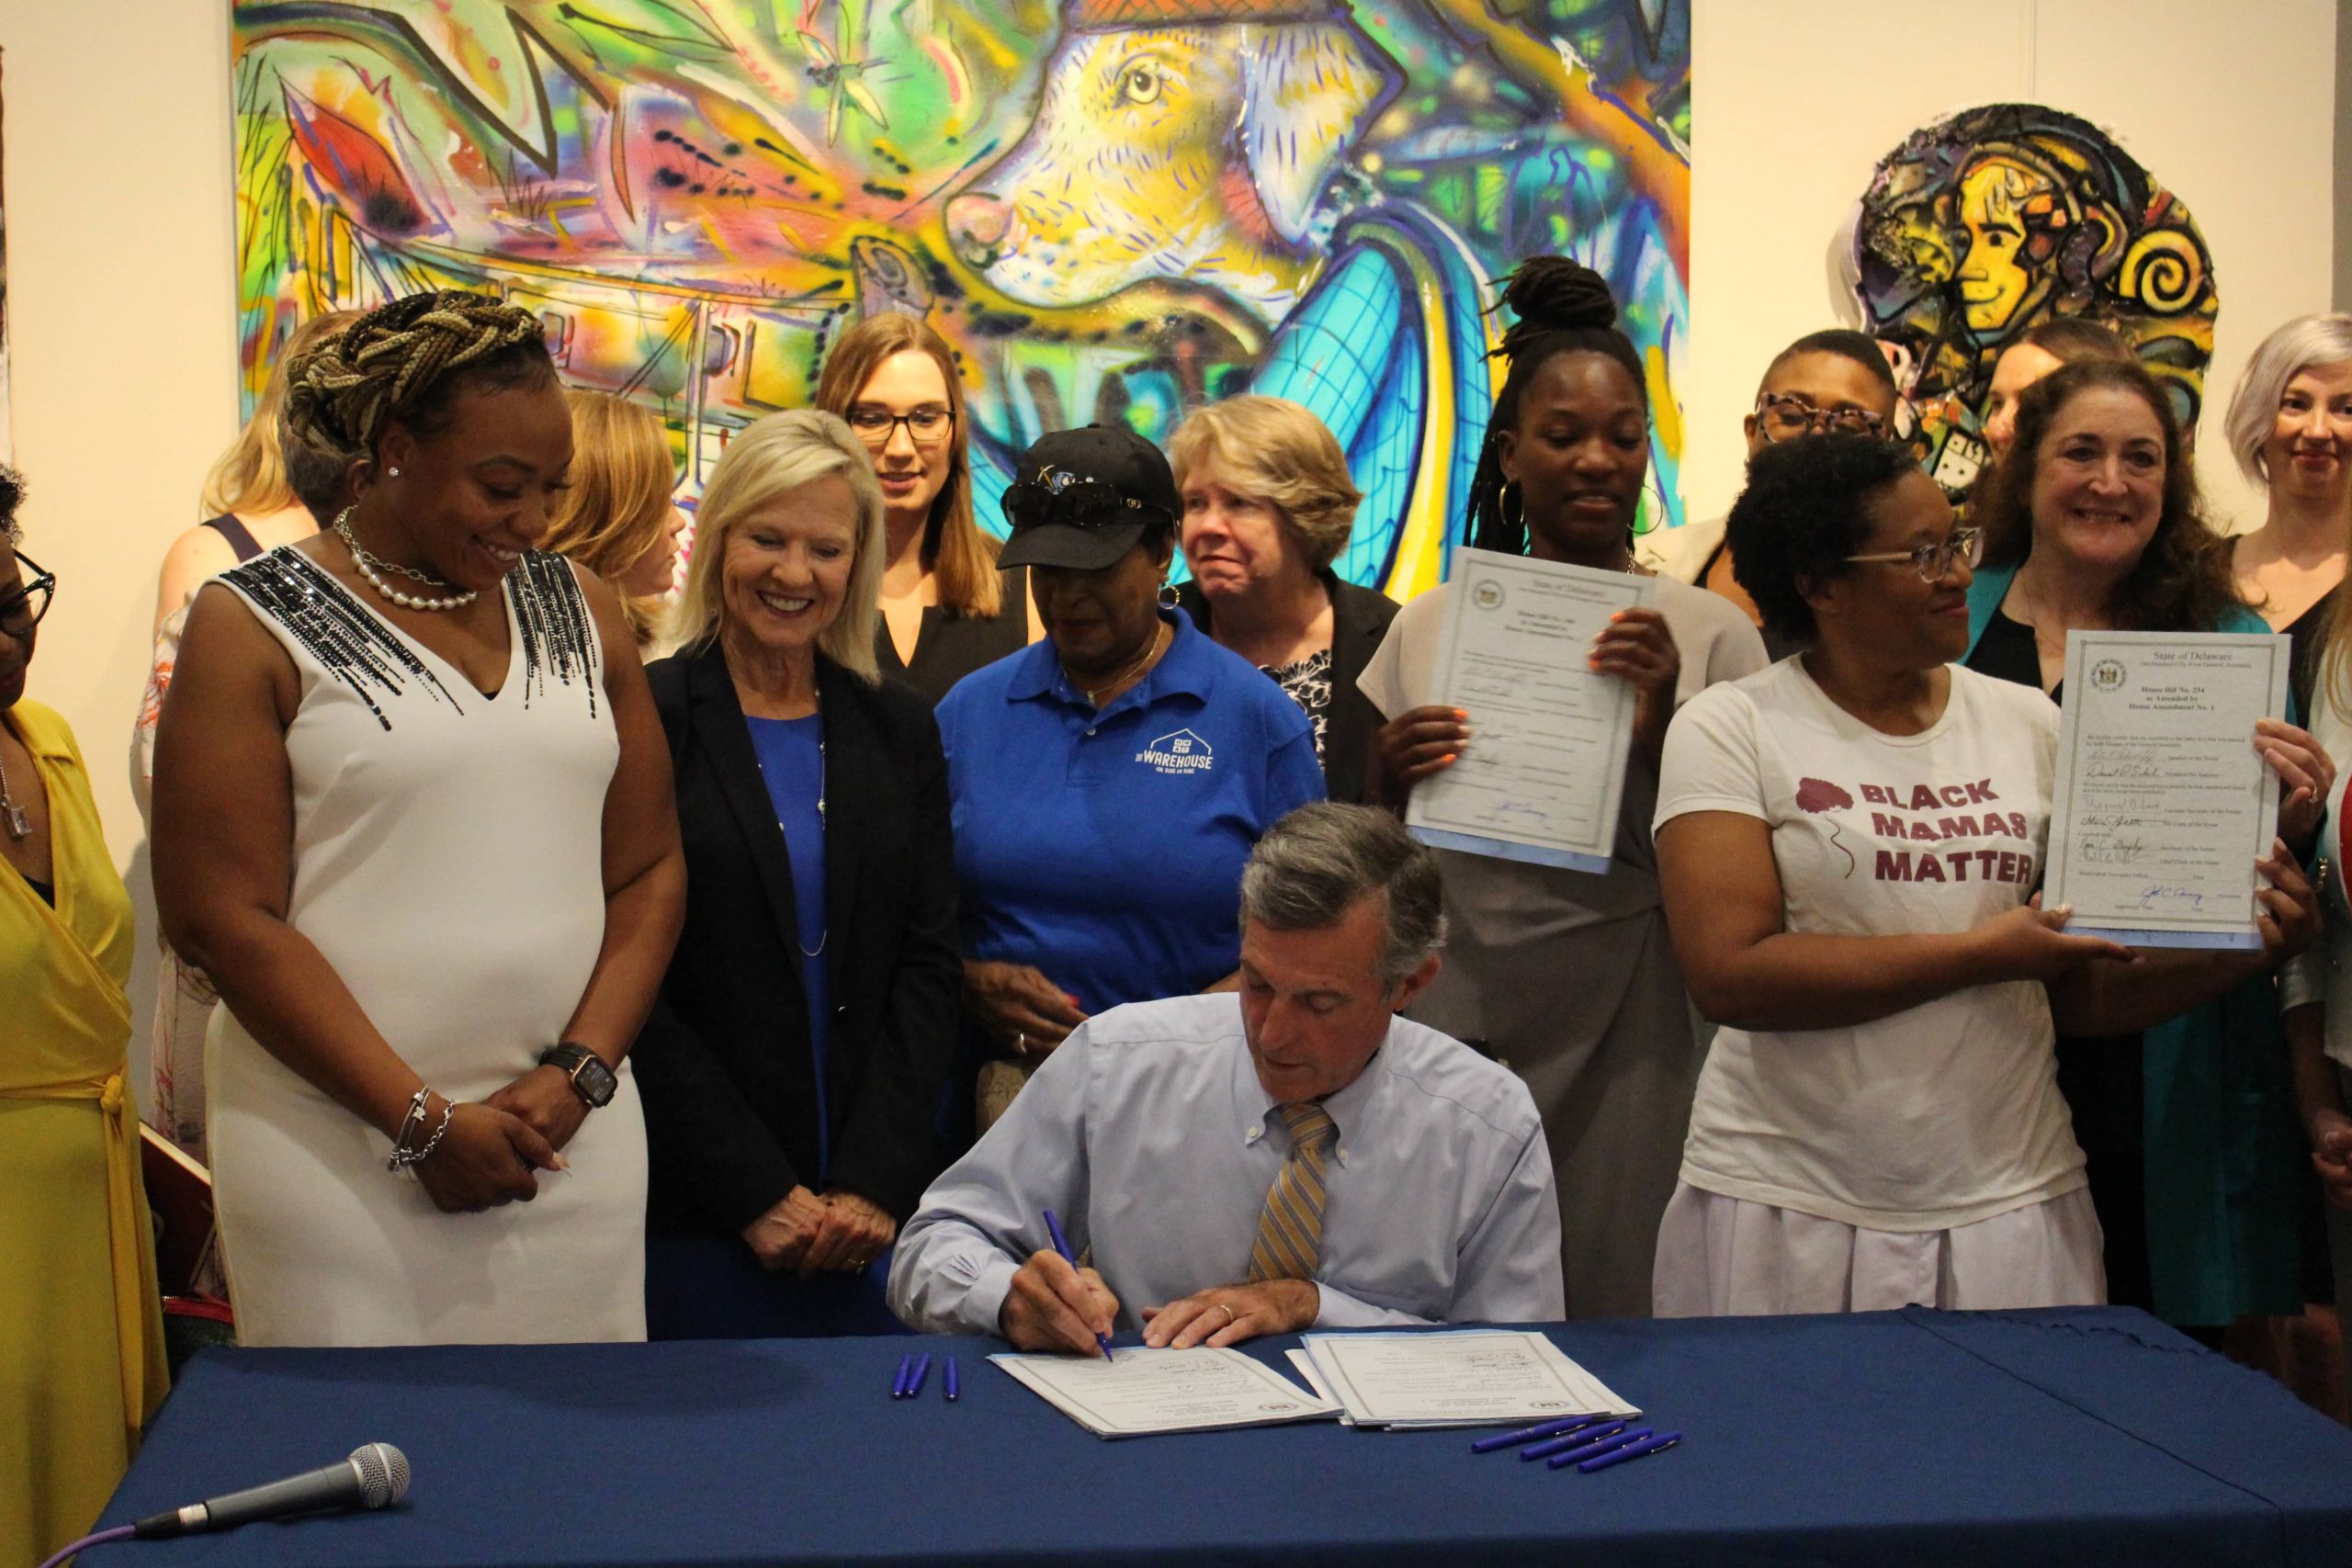 Governor Carney signs legislation while seated at a desk and supporters stand behind him.